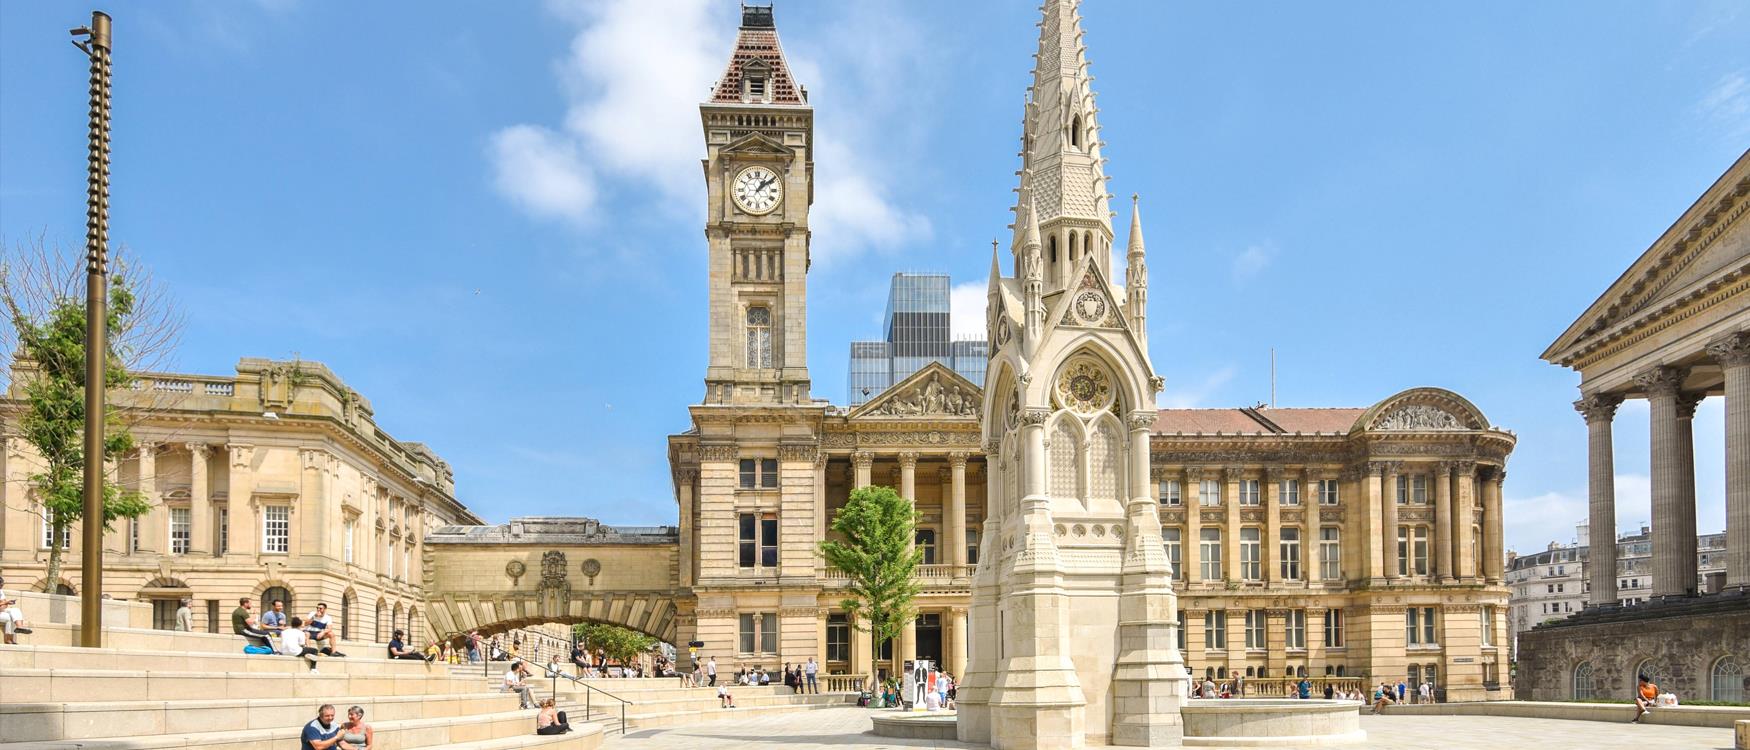 Things to see & do - Chamberlain Square